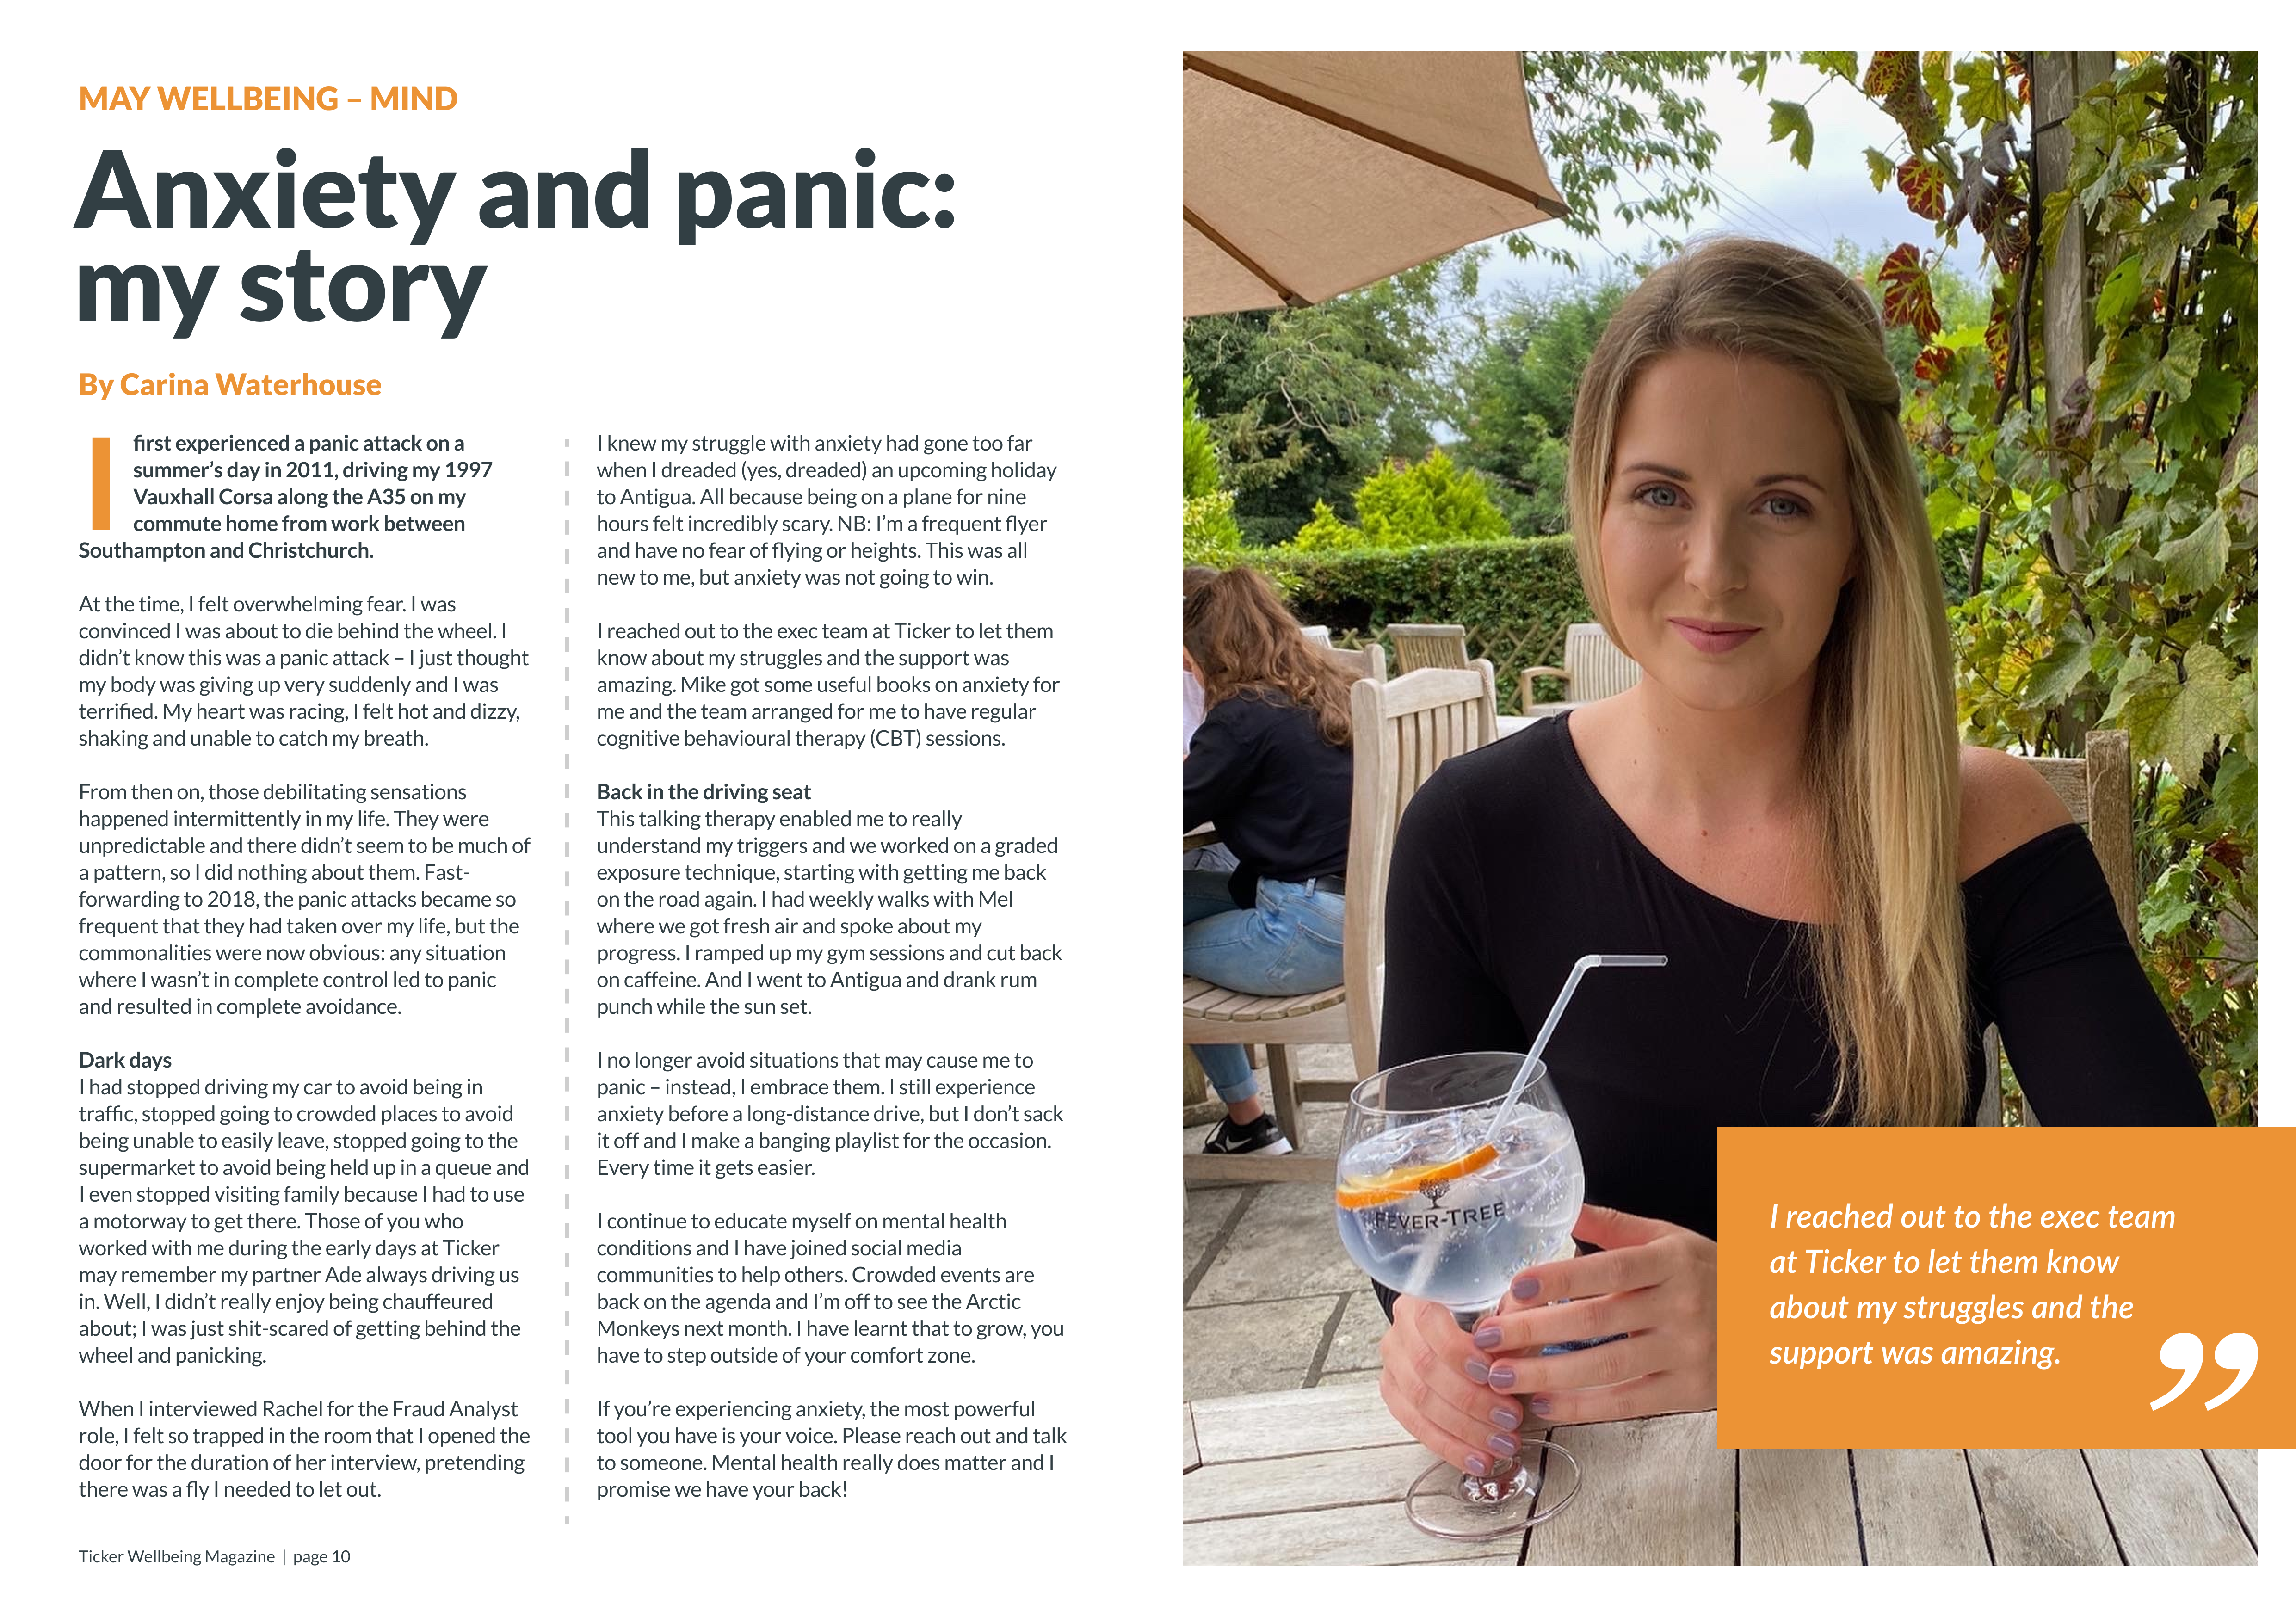 A double-page spread of an interview with Carina Waterhouse about anxiety and her experience.